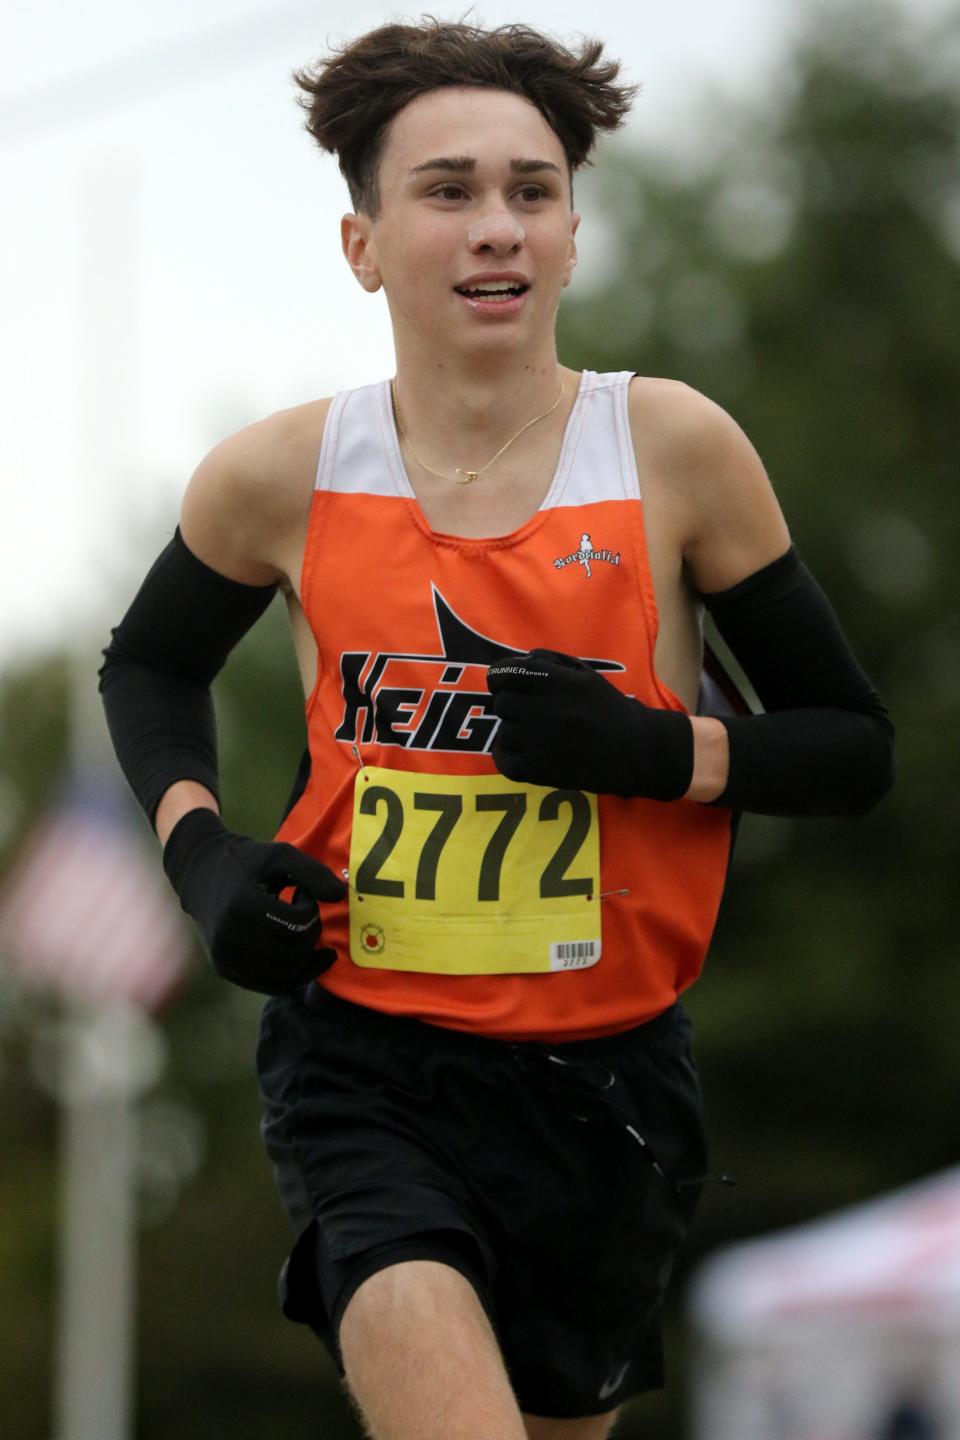 Aidan Morrow, of Hasbrouck Heights, is shown during the Meadowlands race, during the NJIC Divisional Championships, at Garret Mountain Reservation.  Morrow would finish first with a time of, 17:12.  Monday, October 3, 2022